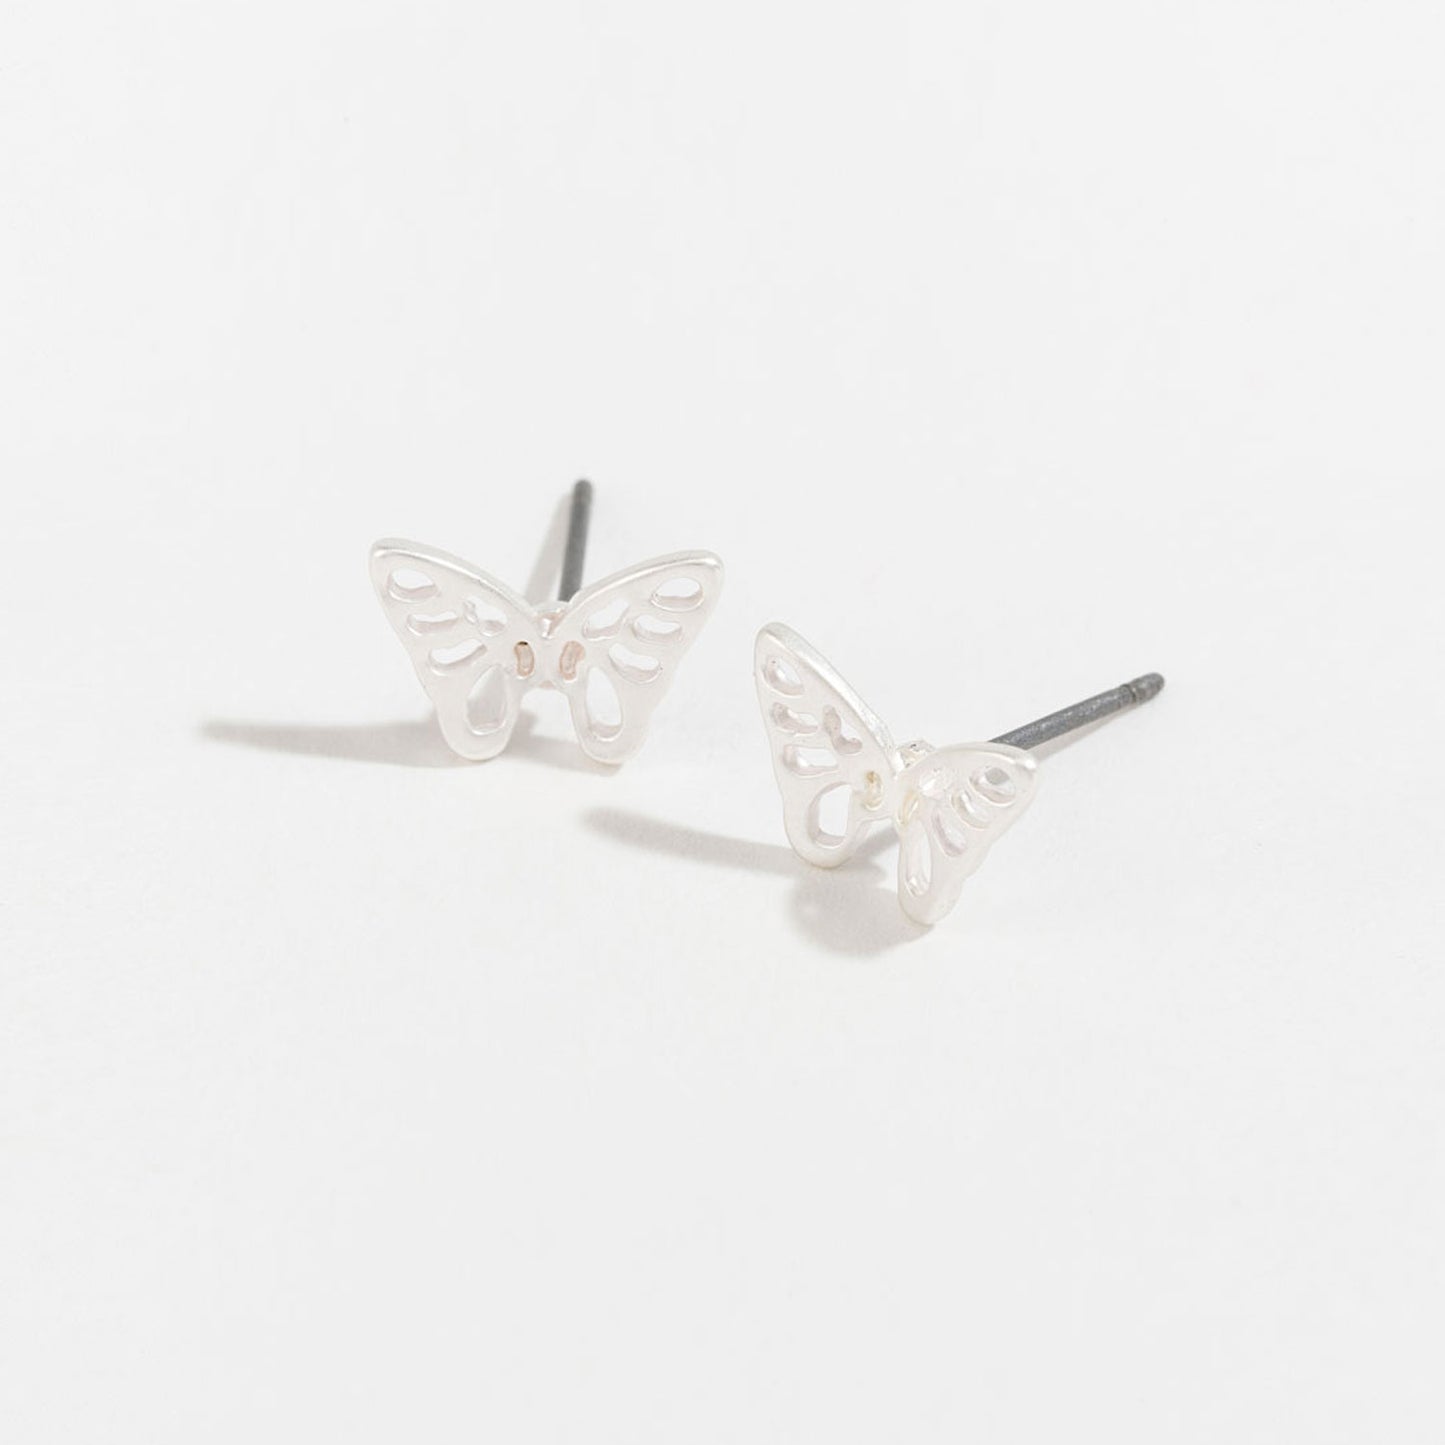 silver butterfly stud earrings on a white background